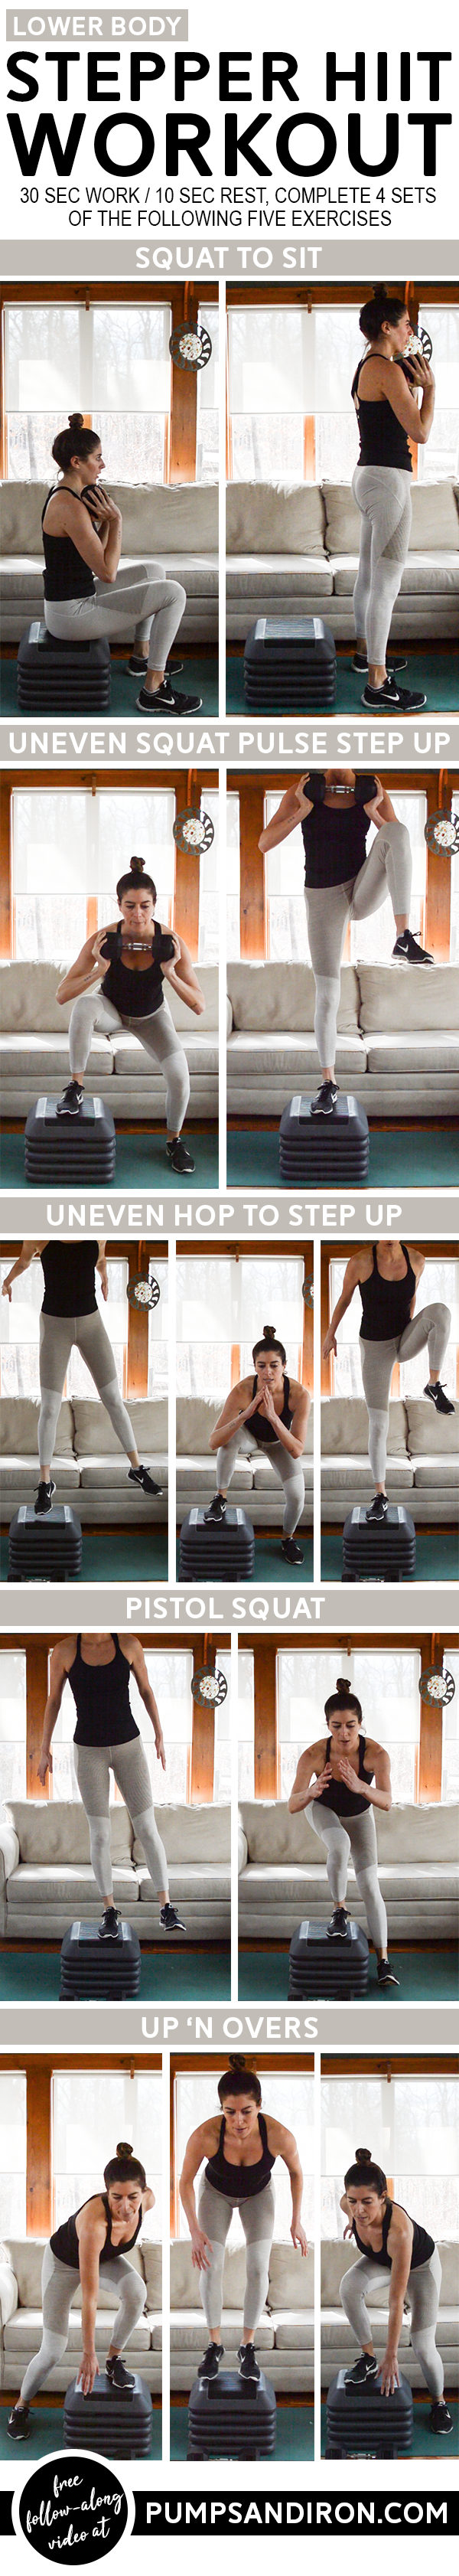 Step HIIT Workout for Lower Body – 15 Minutes